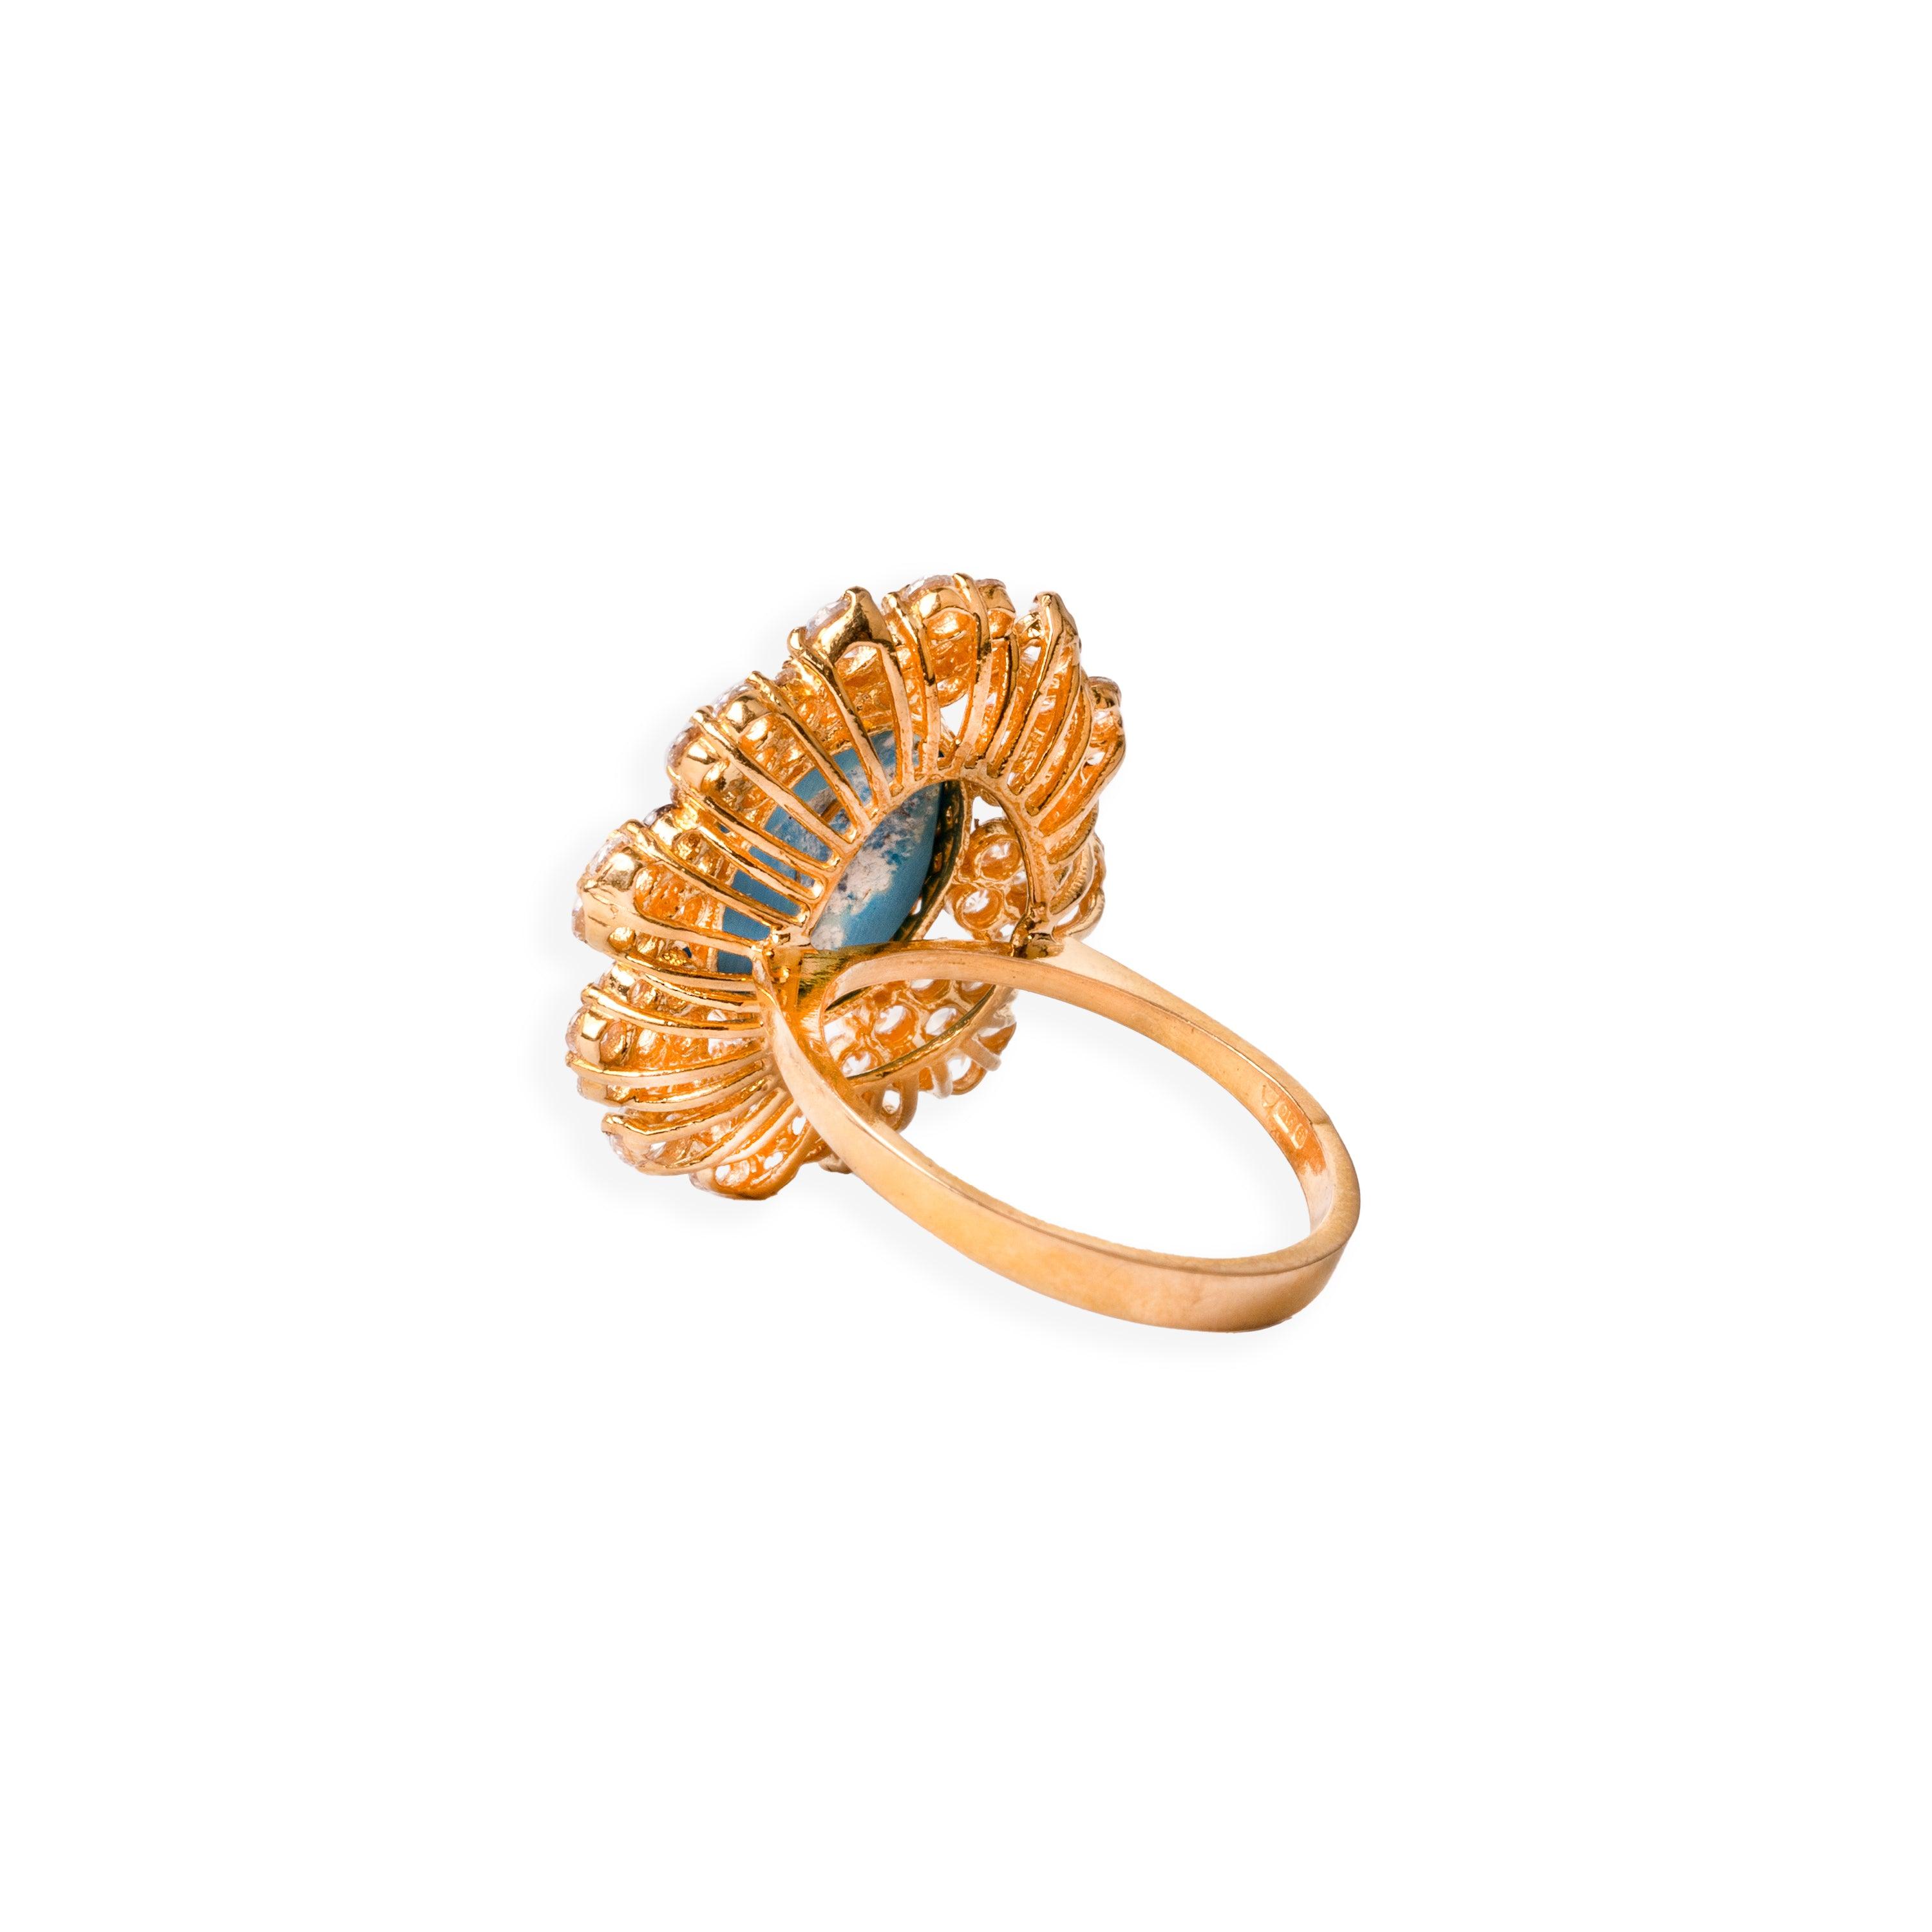 22ct Gold Cubic Zirconia and Turquoise Dress Ring (7.5g) LR-6551 - Minar Jewellers